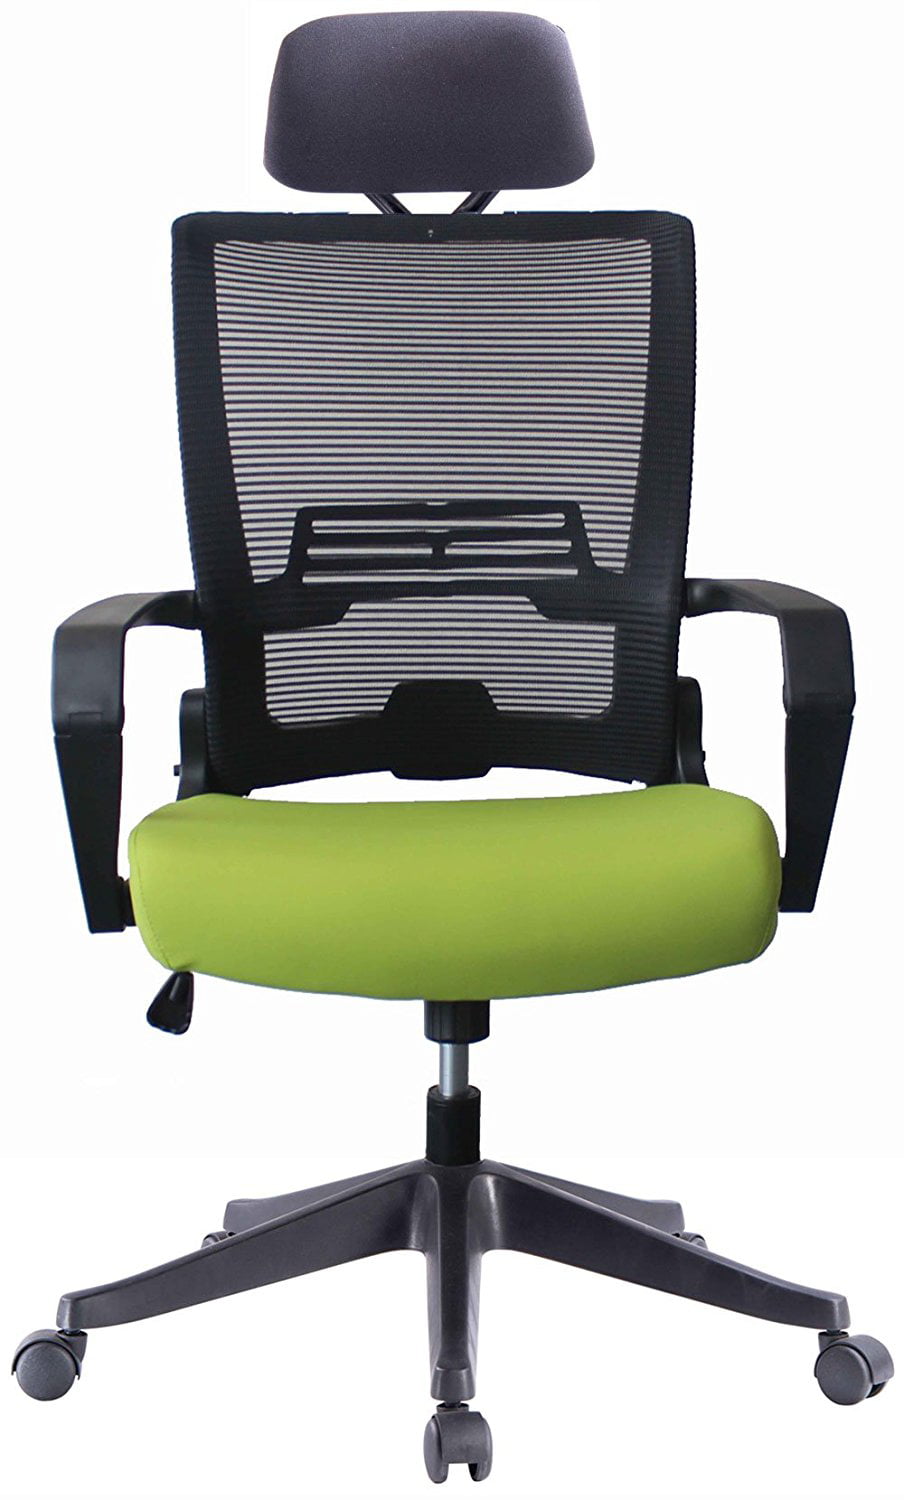 Fabric Arms and Adjustable Lumbar Support 69 x 67 x 110.5 cm Office Needs 24-Hour Desk Chair with Seat Slide Royal Blue 